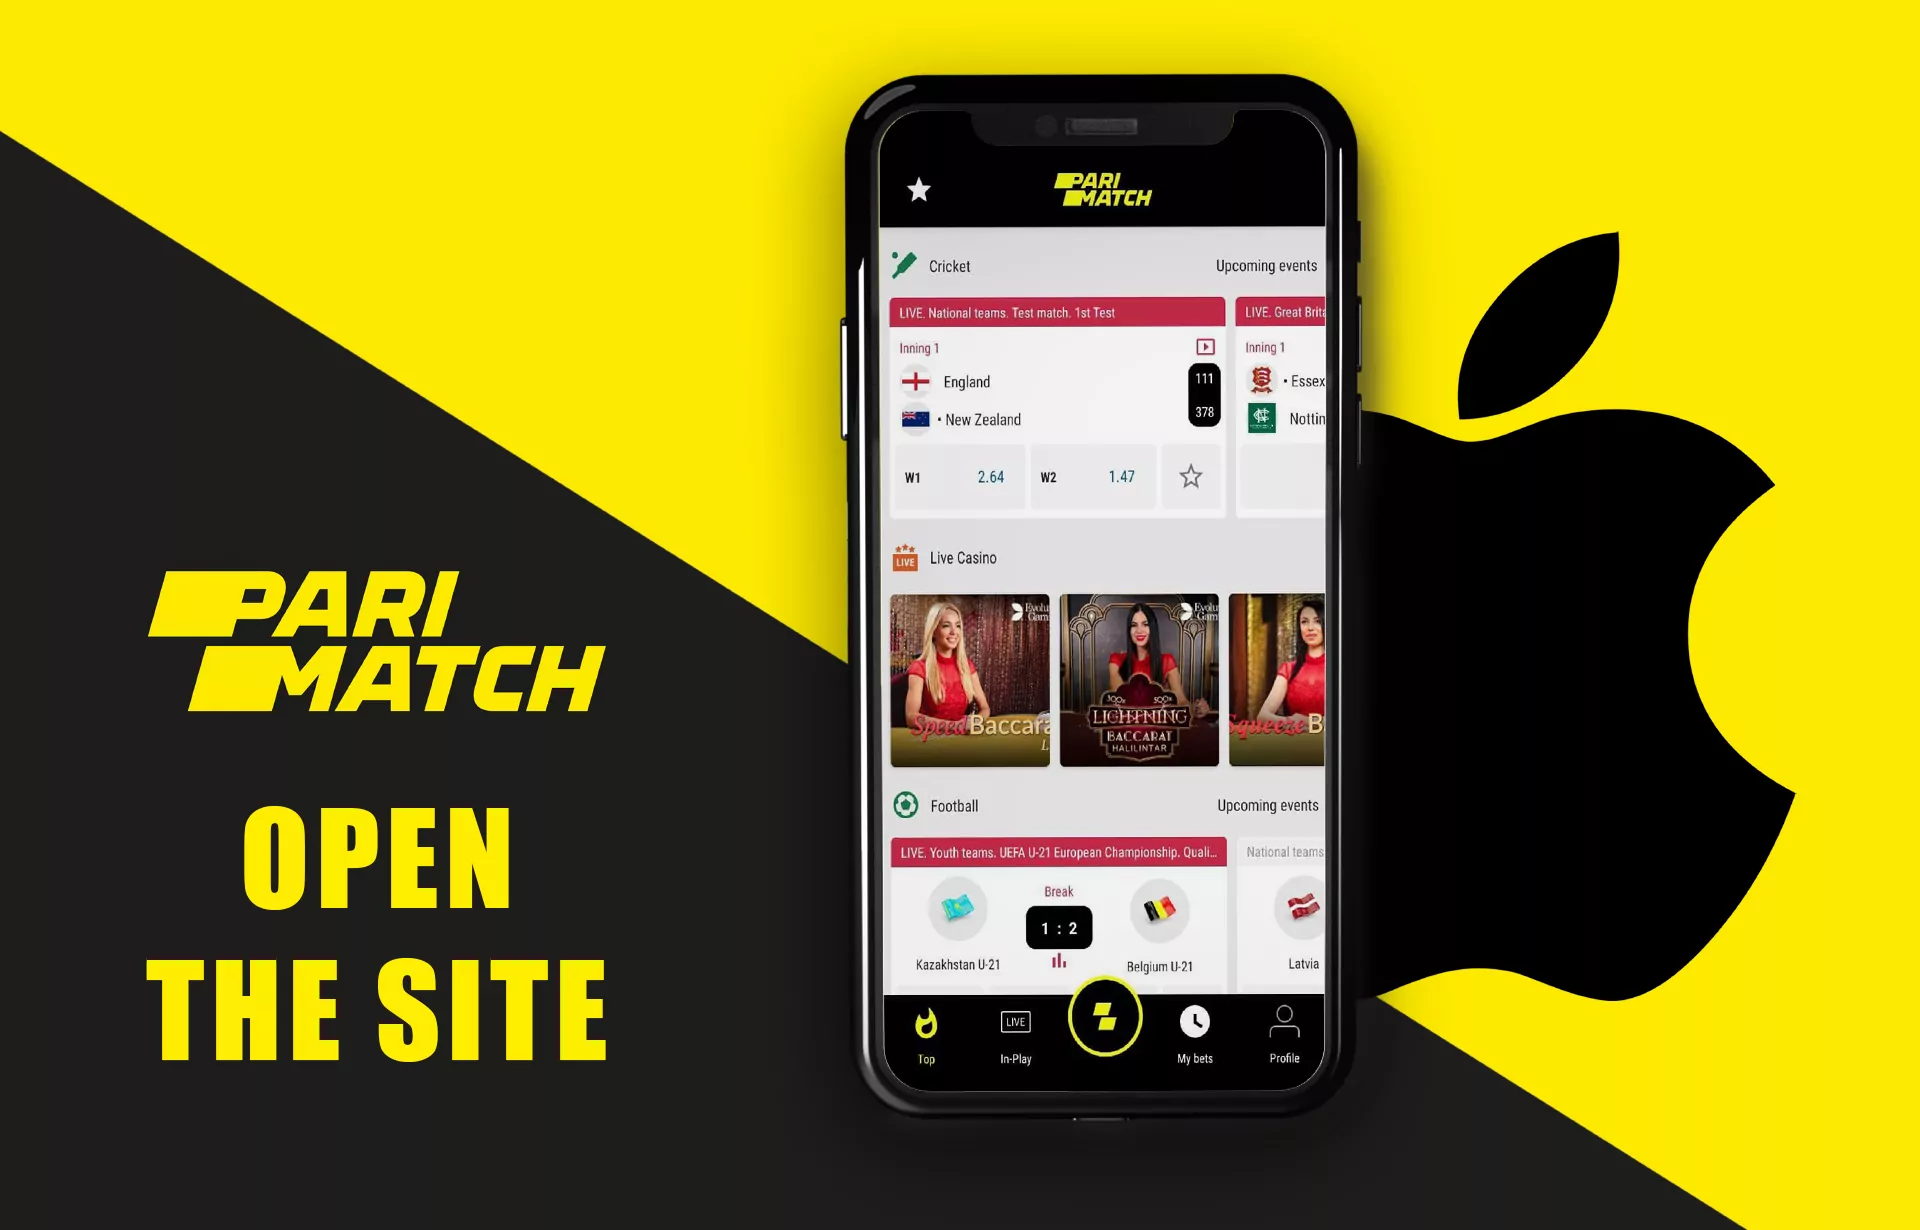 Open the website of Parimatch in a mobile browser on your iPhone.